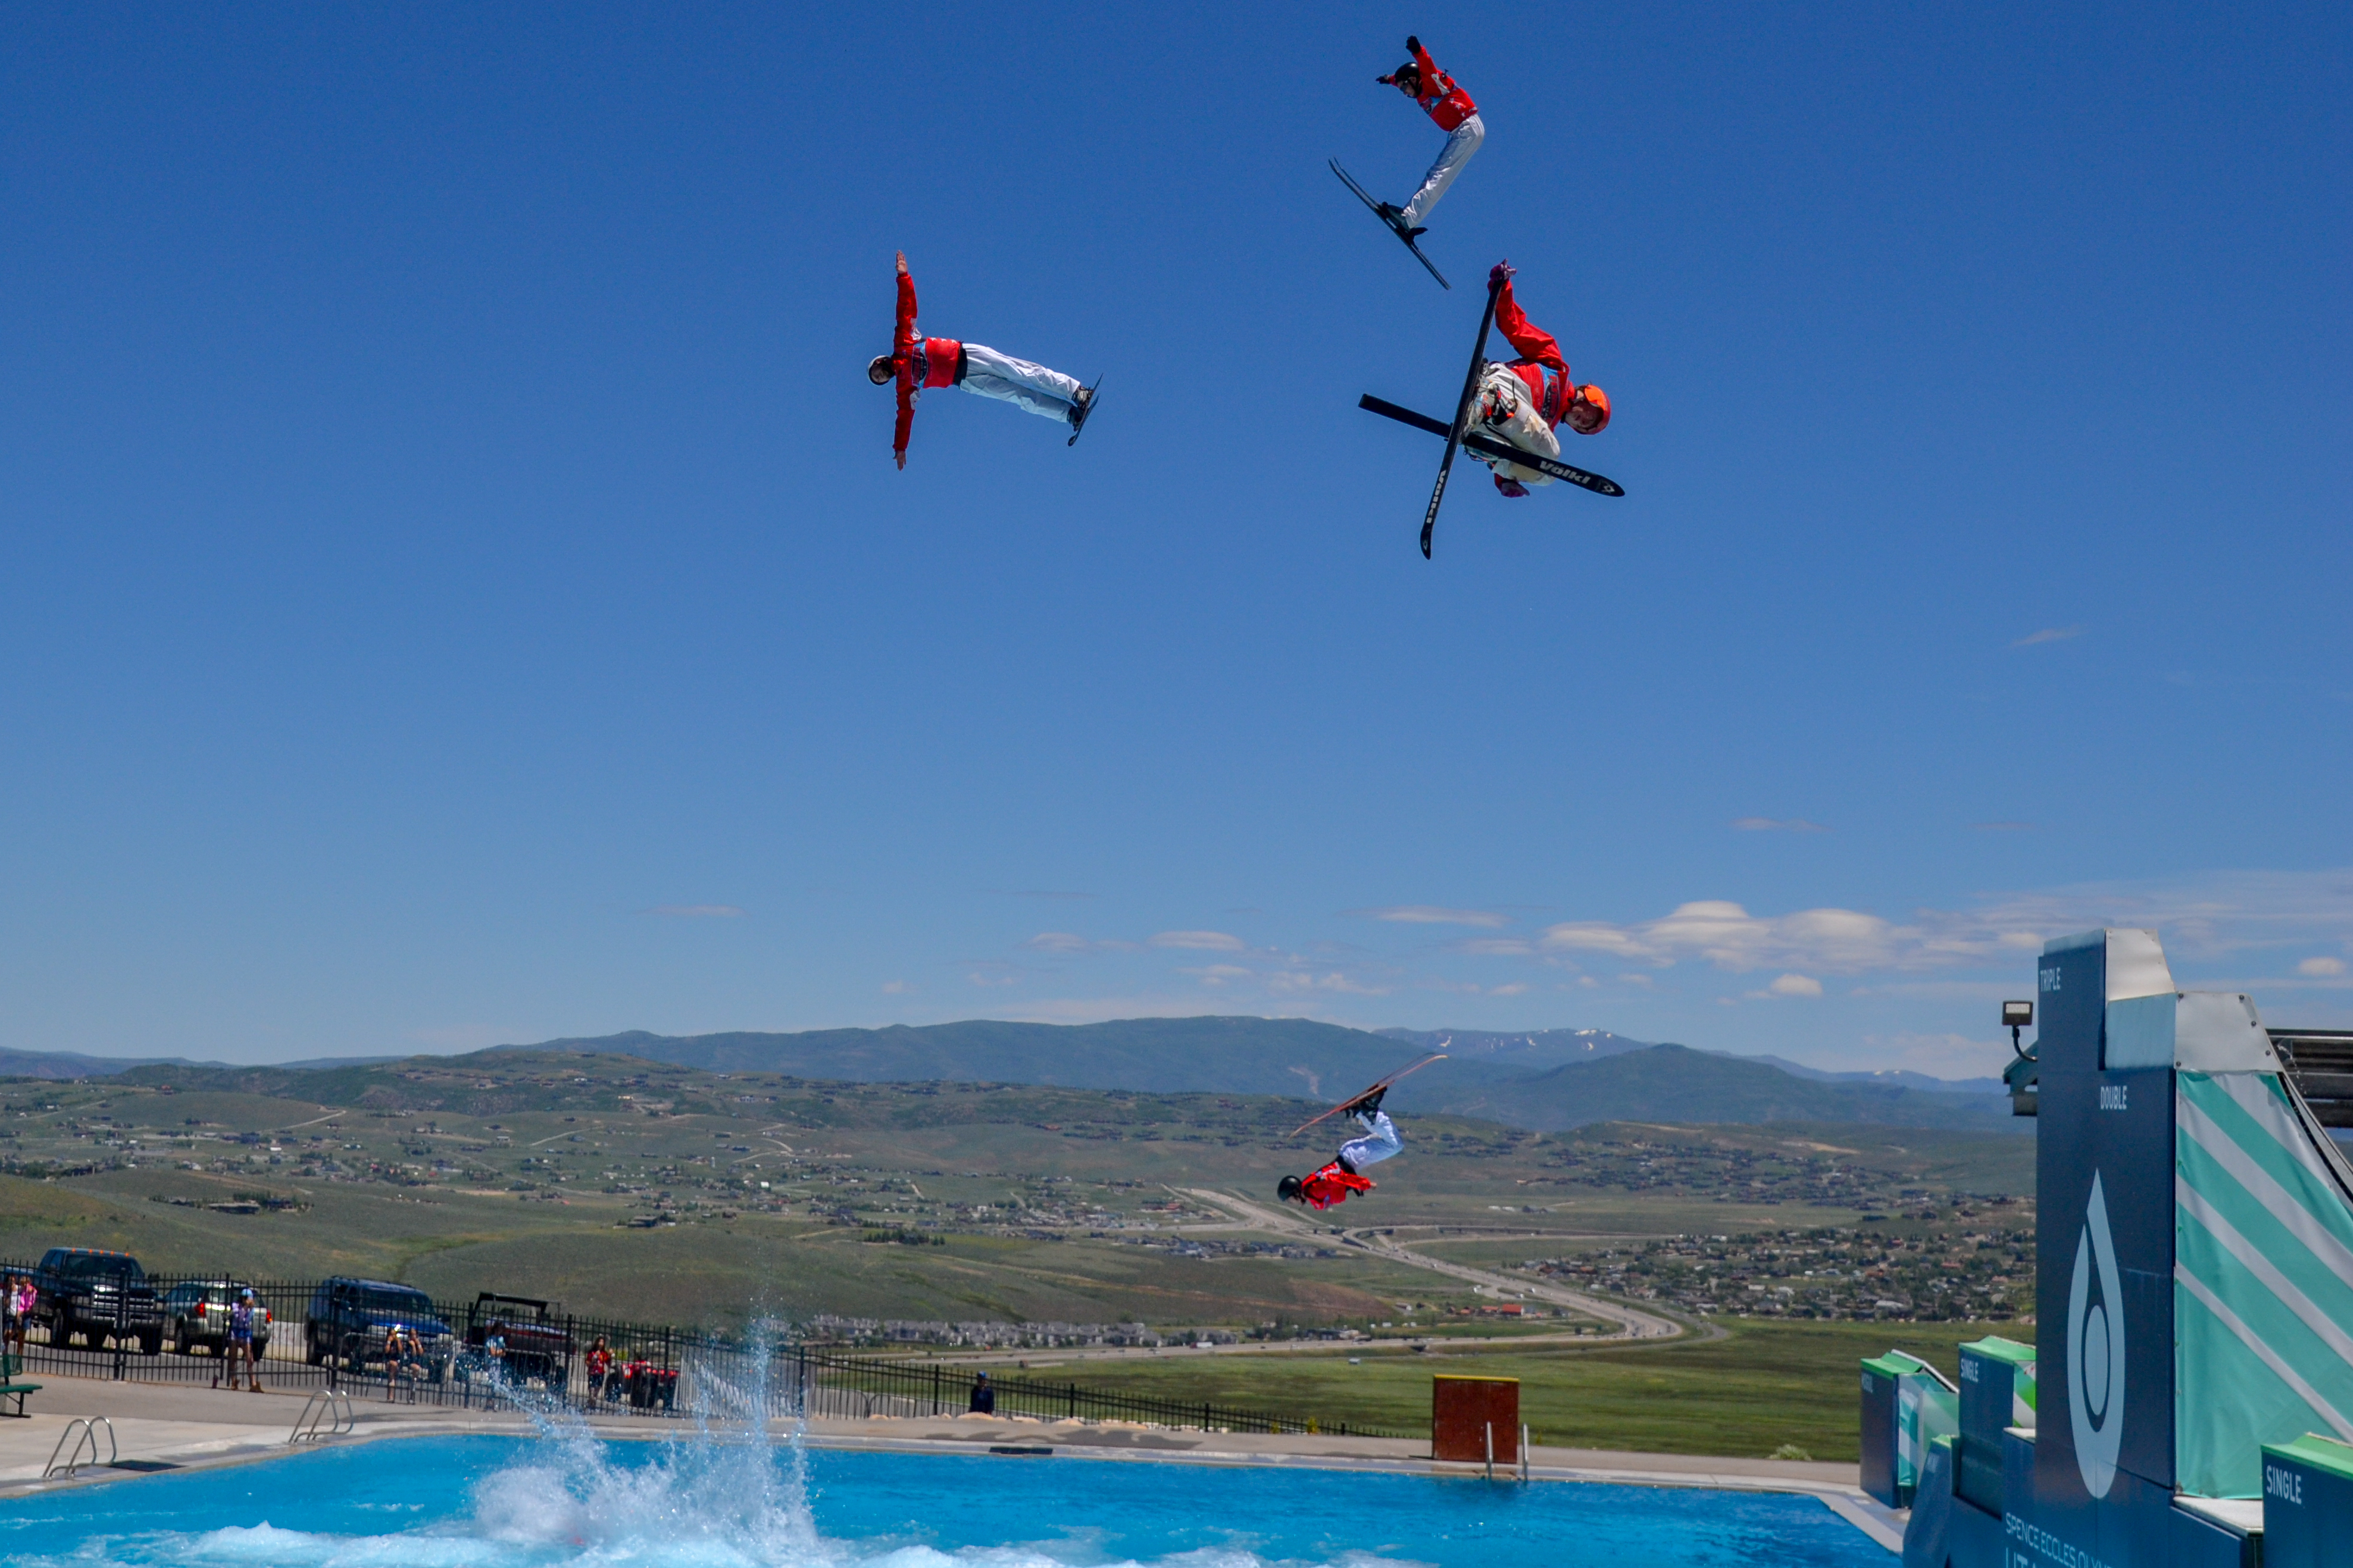 Freestyle Skiers Jumping into pool at Utah Olympic Park